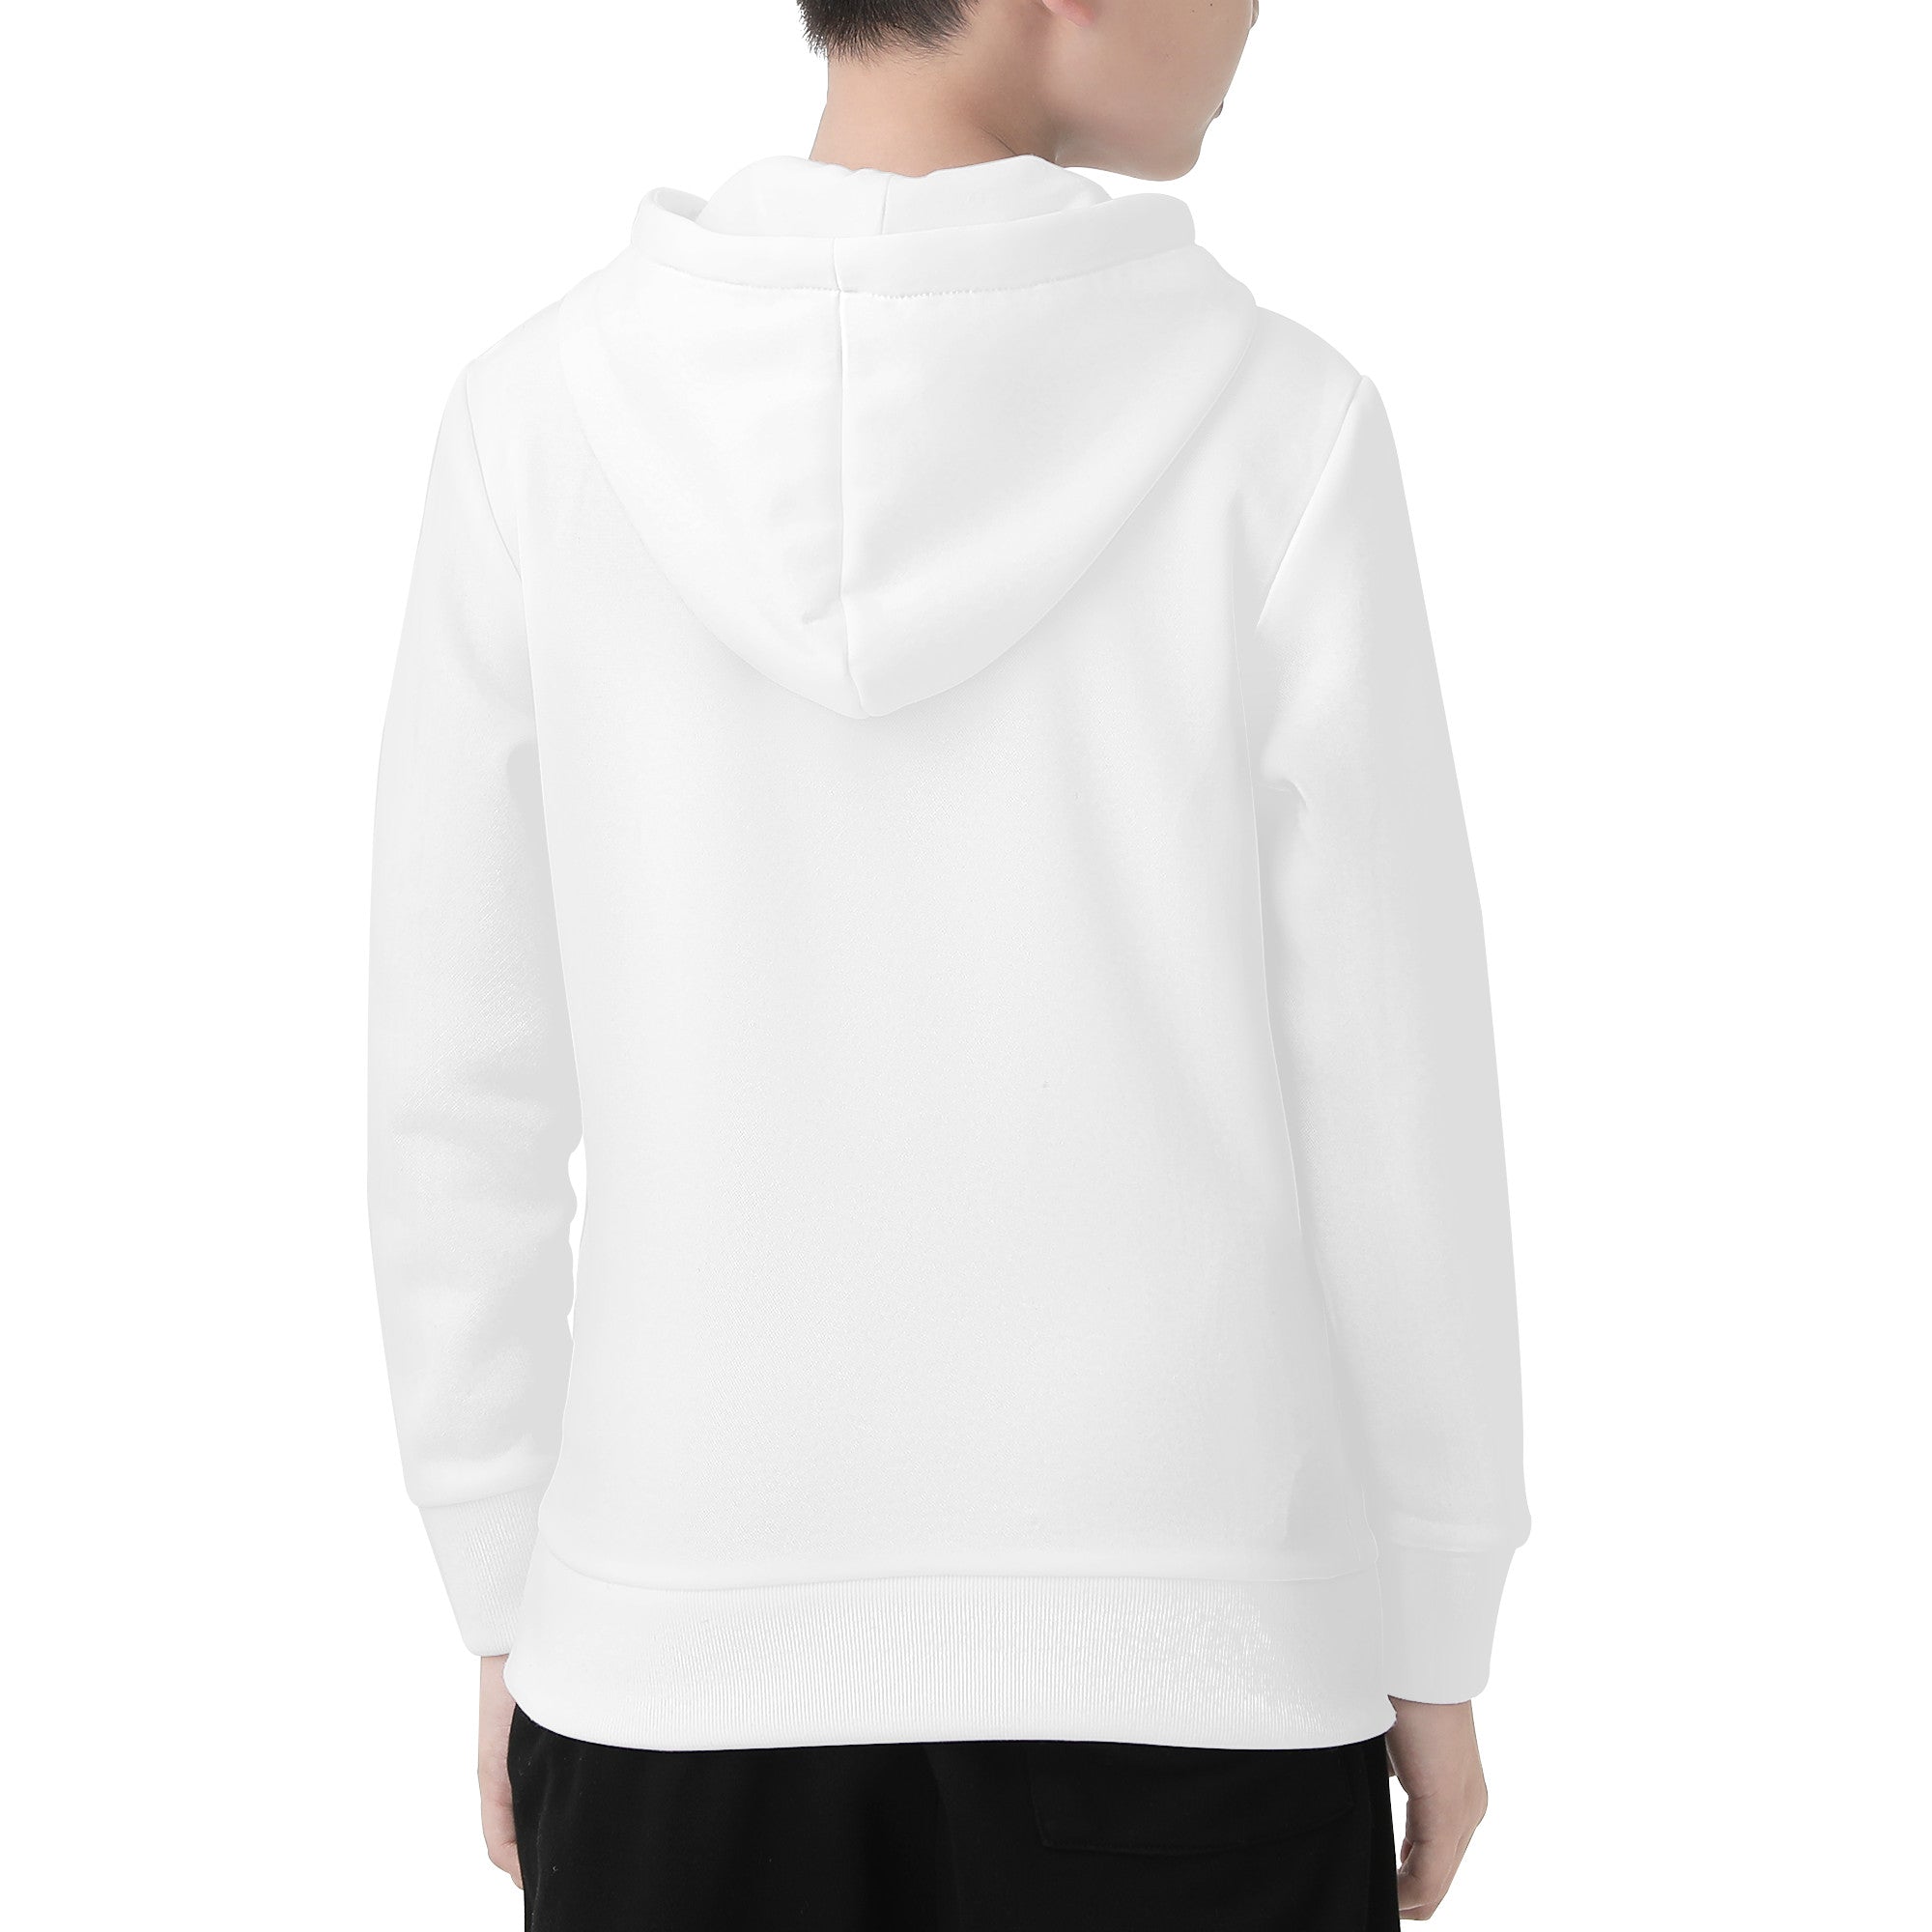 SF_F5 Youth's All Over Print Hoodie